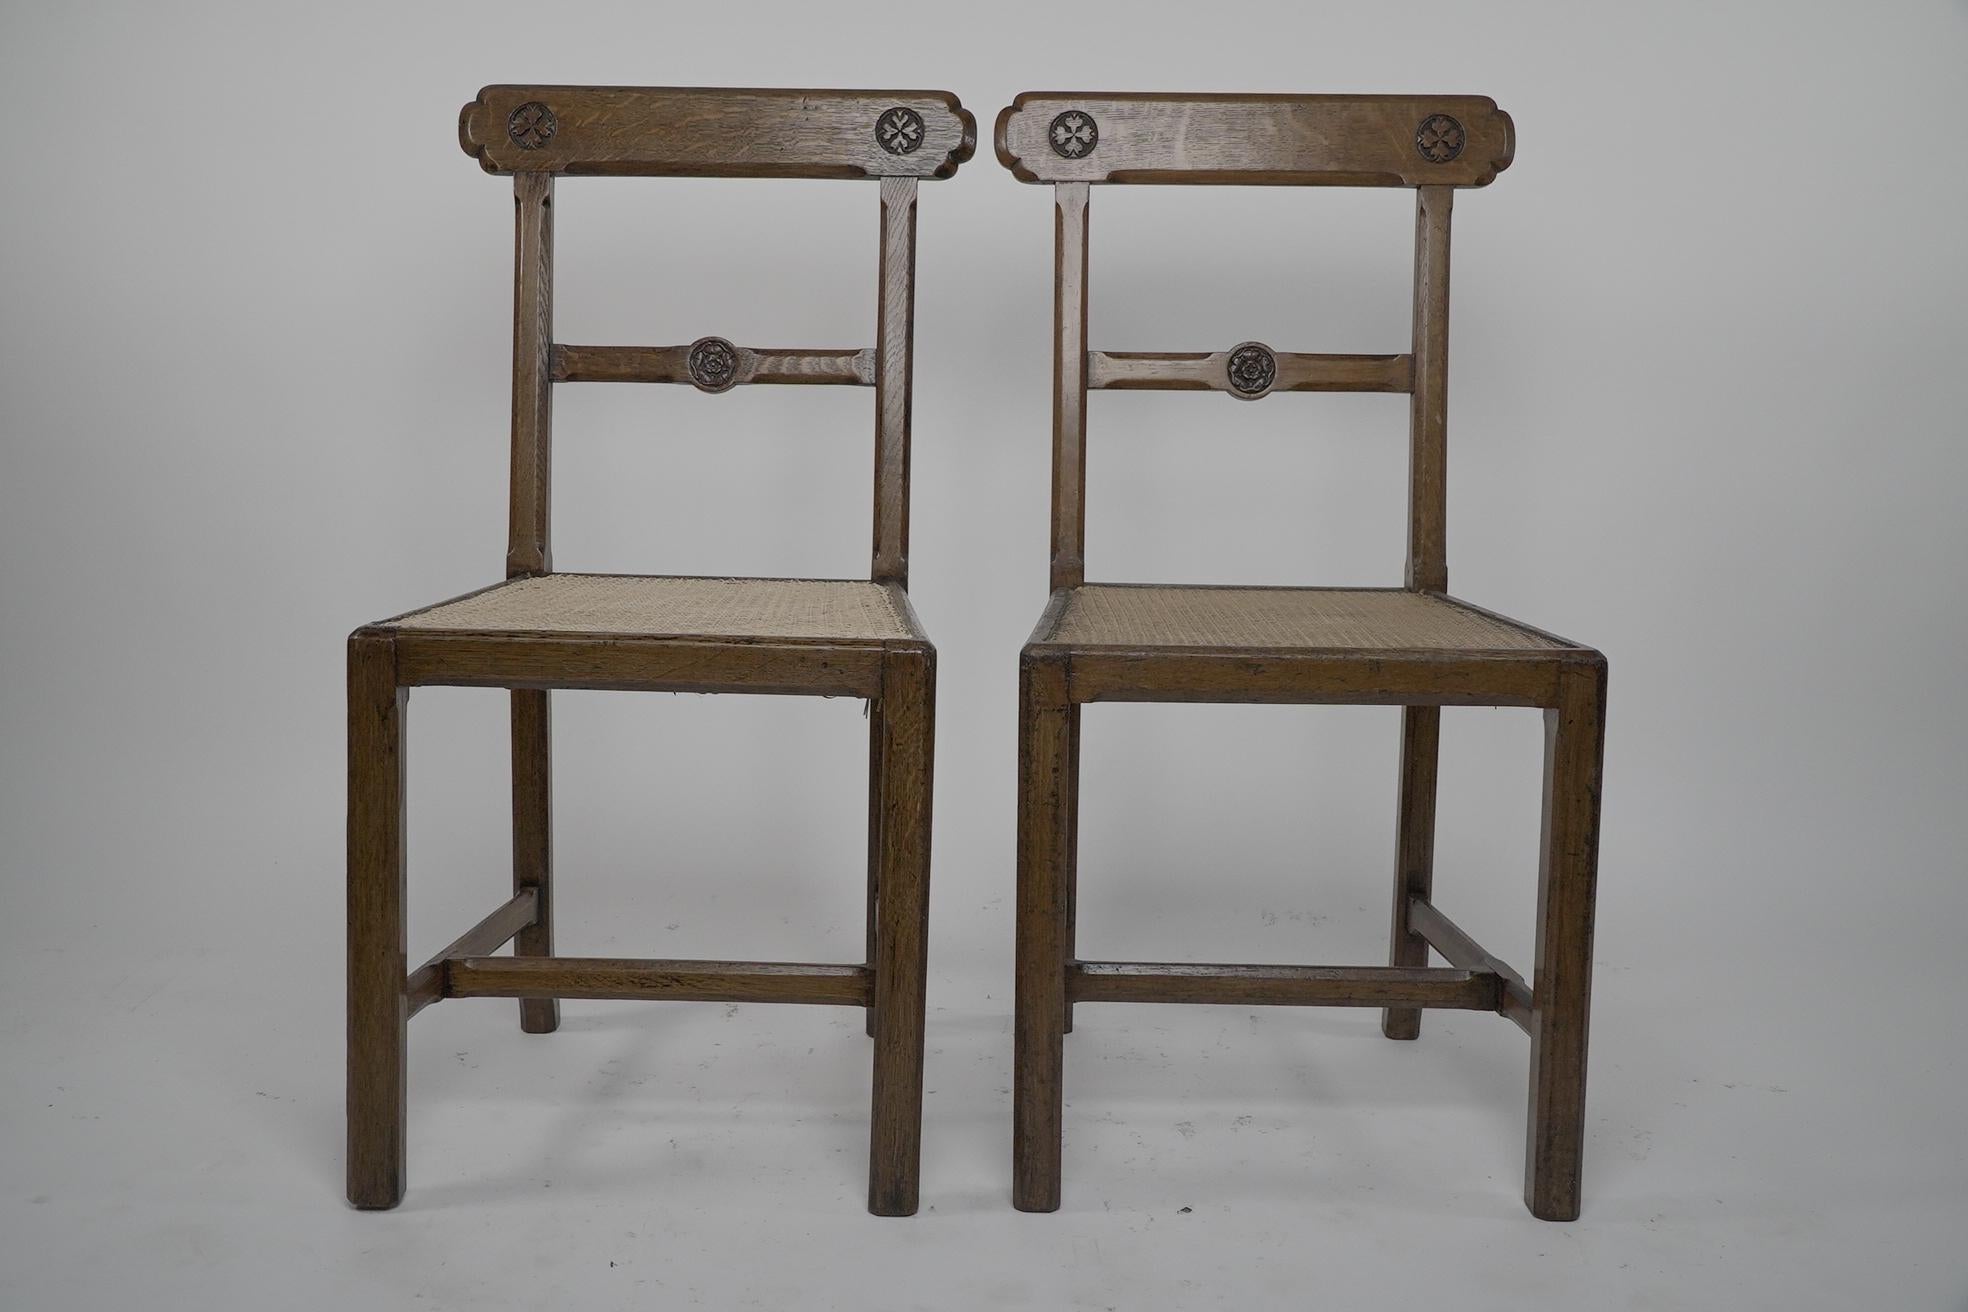 English J.G.Crace attributed. In the style of AWN Pugin. A pair of Gothic Revival chairs For Sale